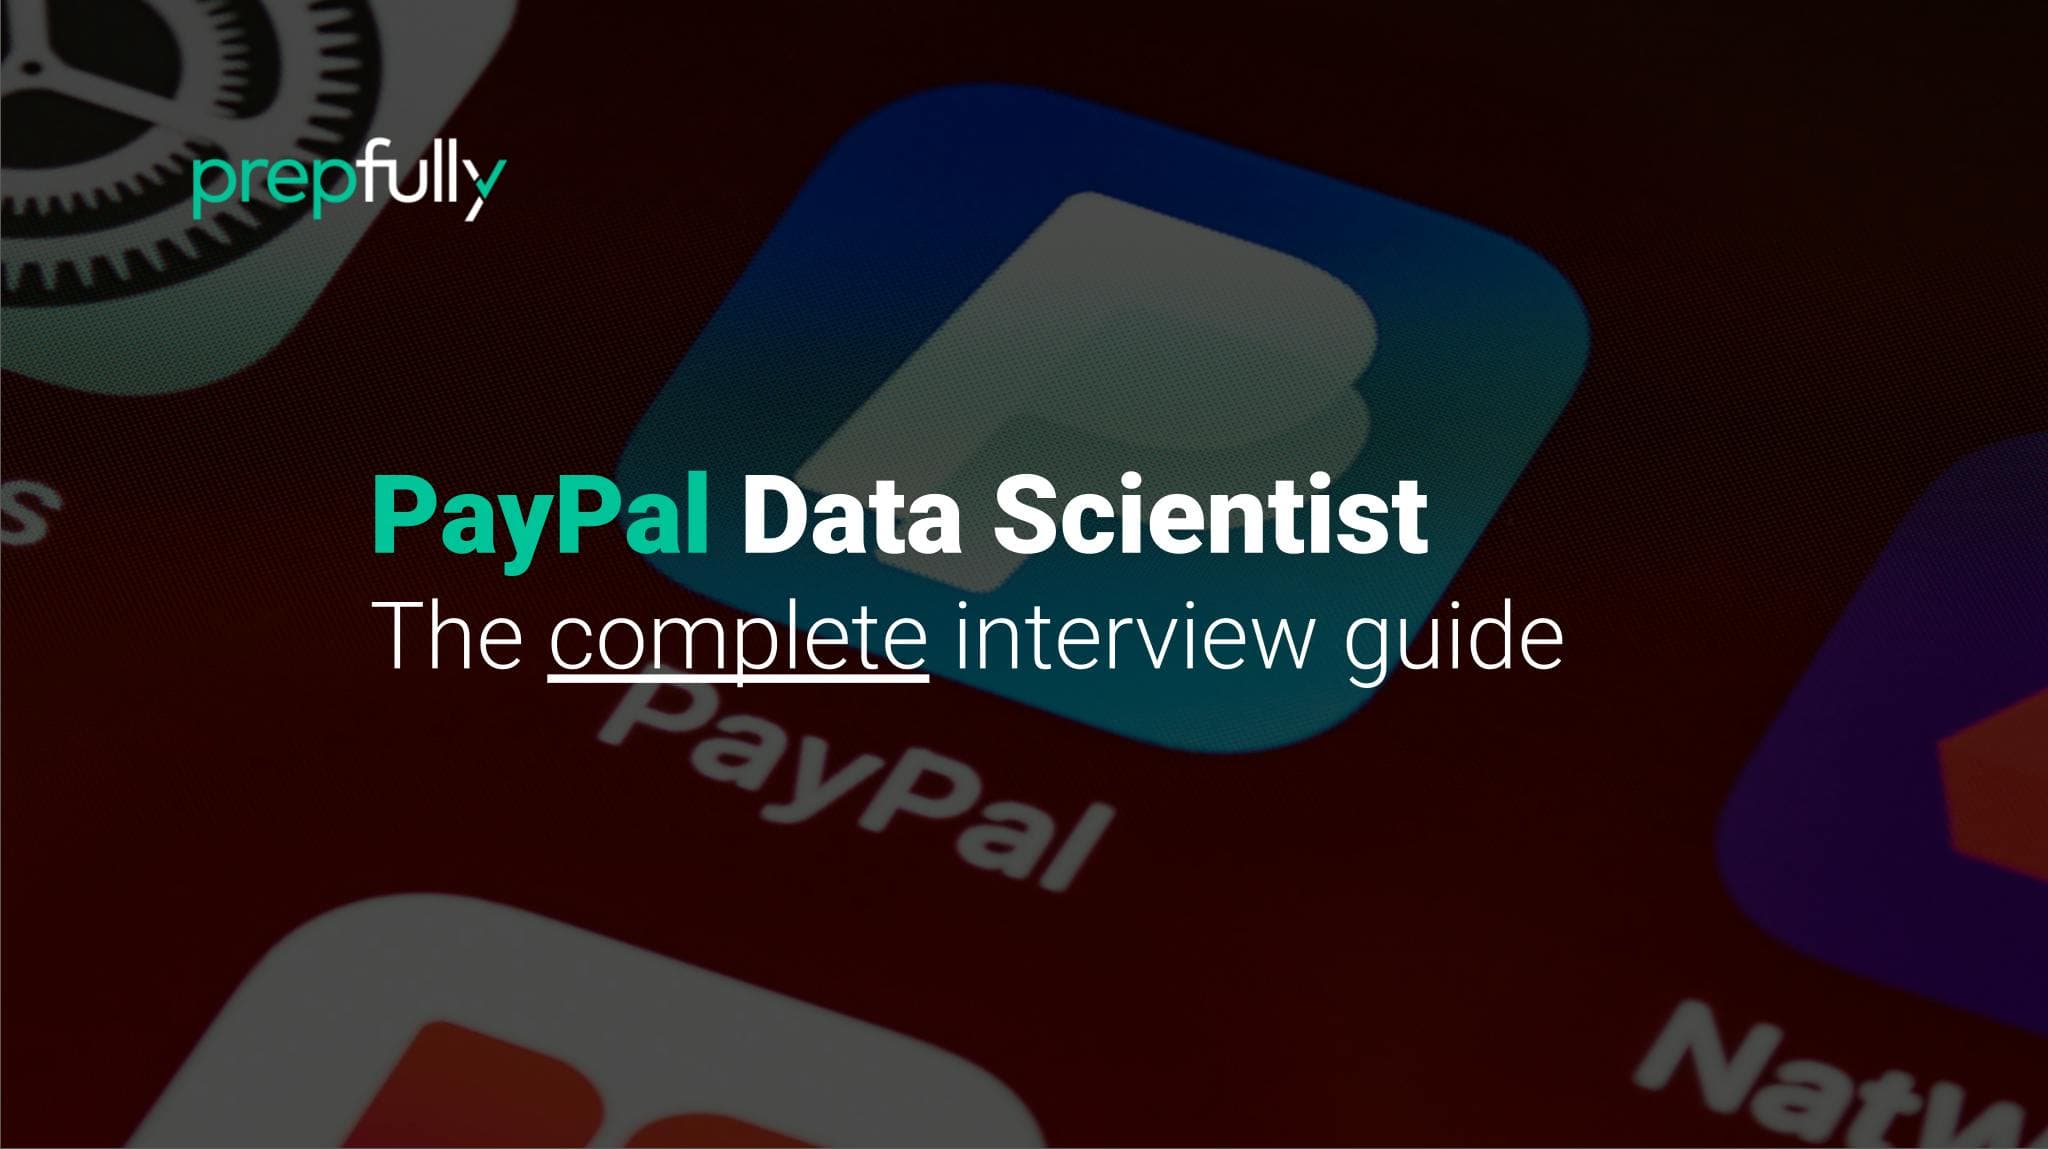 Interview guide for PayPal Data Scientist